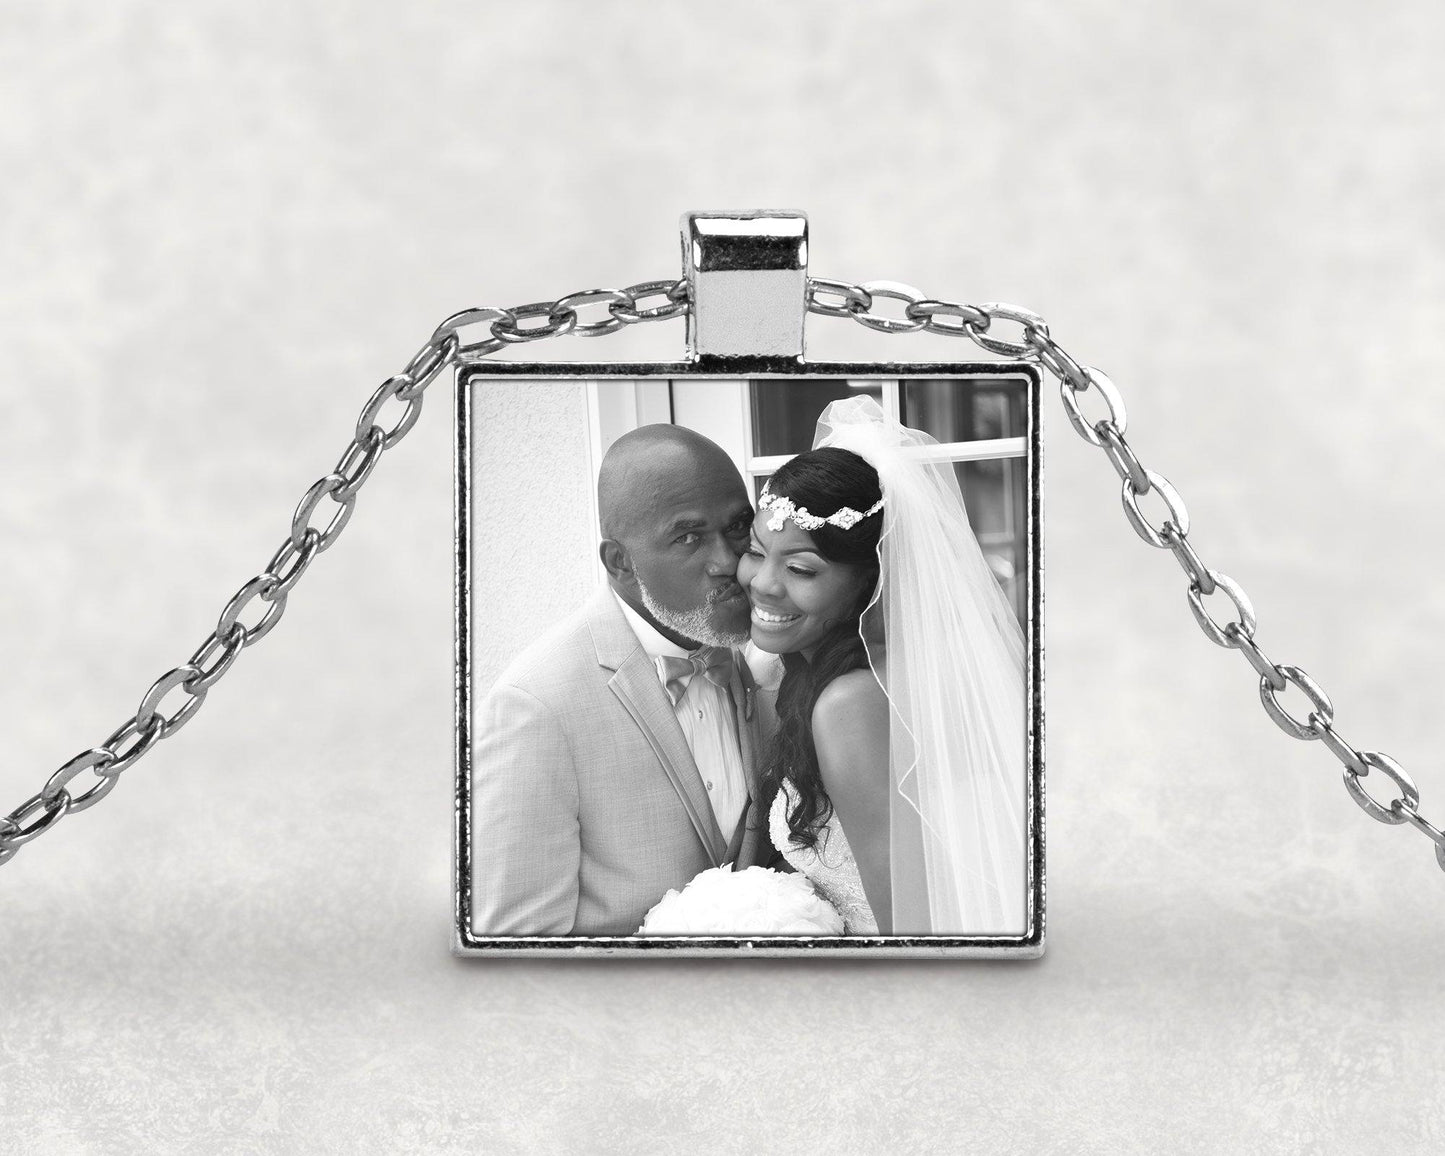 Create Your Own Square Bezel Pendant - Schoppix Gifts